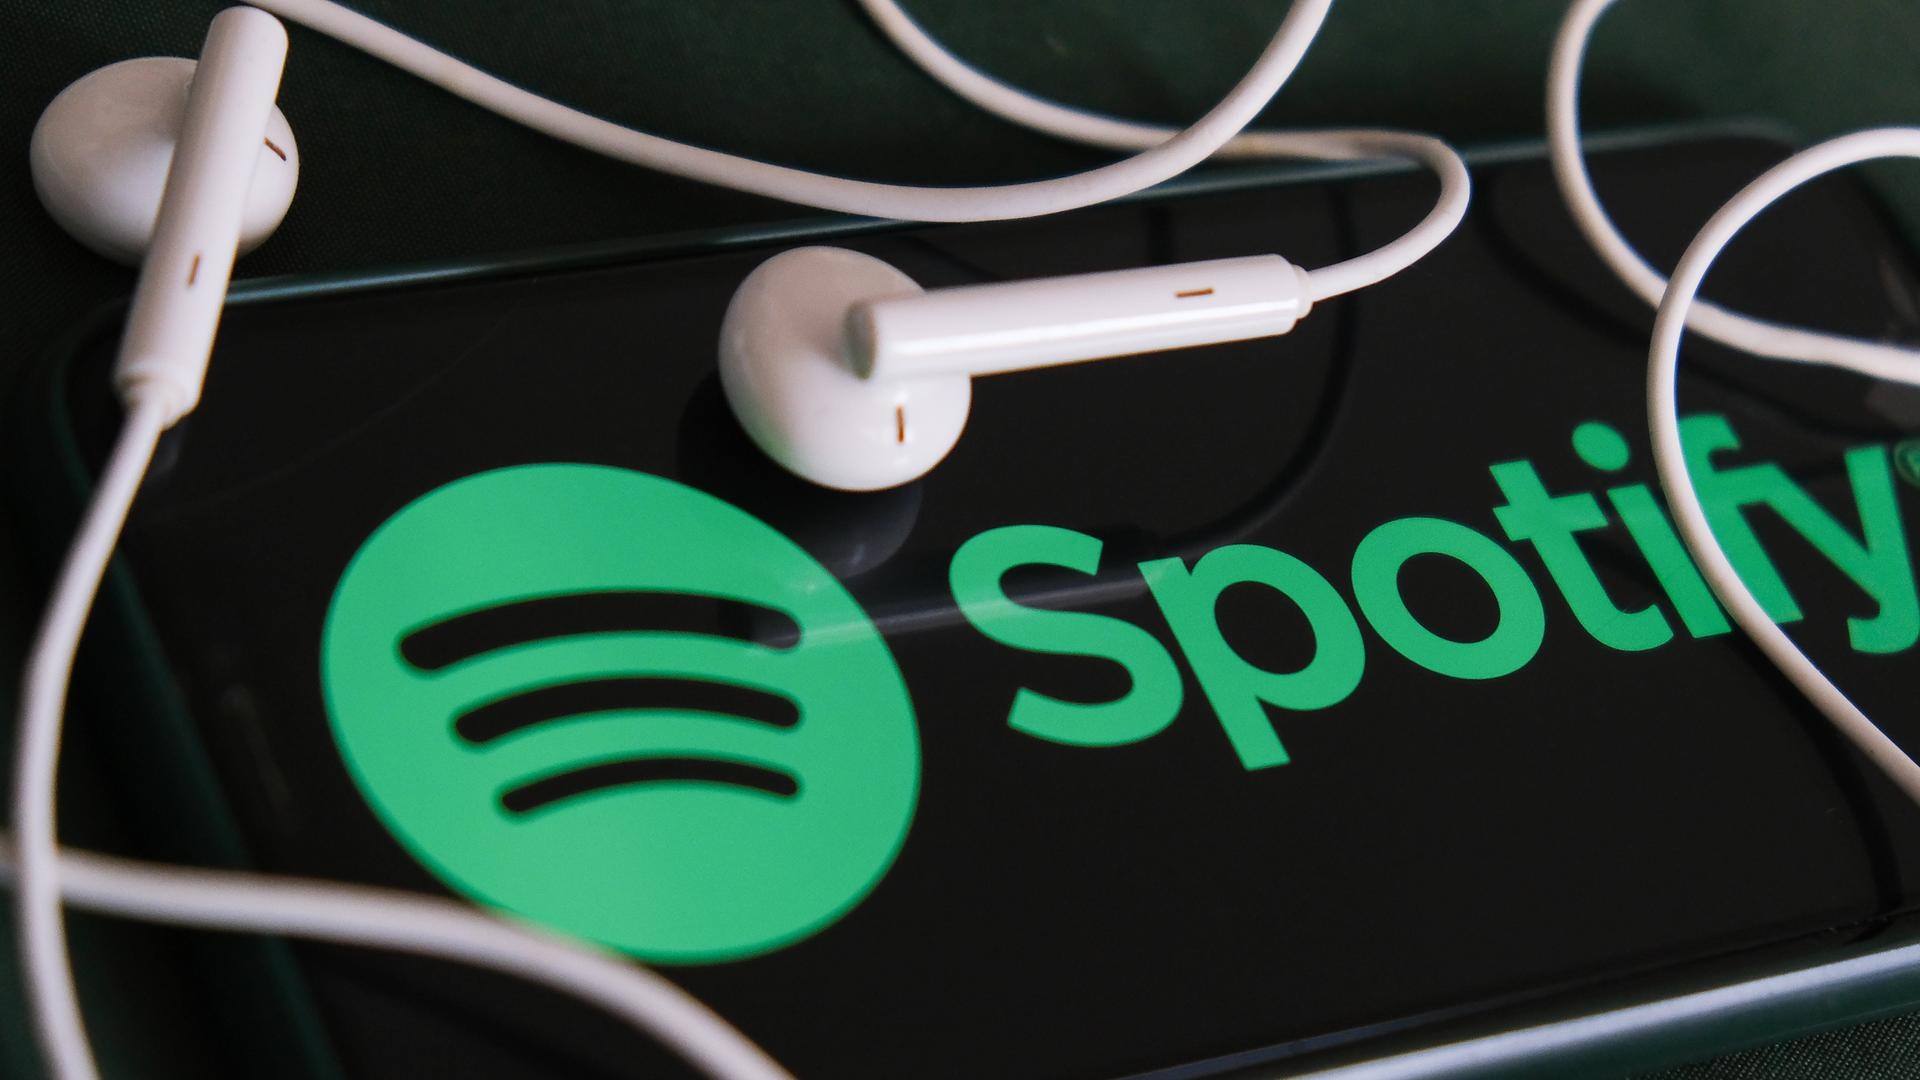 Spotify: A digital music, podcast, and video service, Millions of songs and podcasts for free. 1920x1080 Full HD Background.